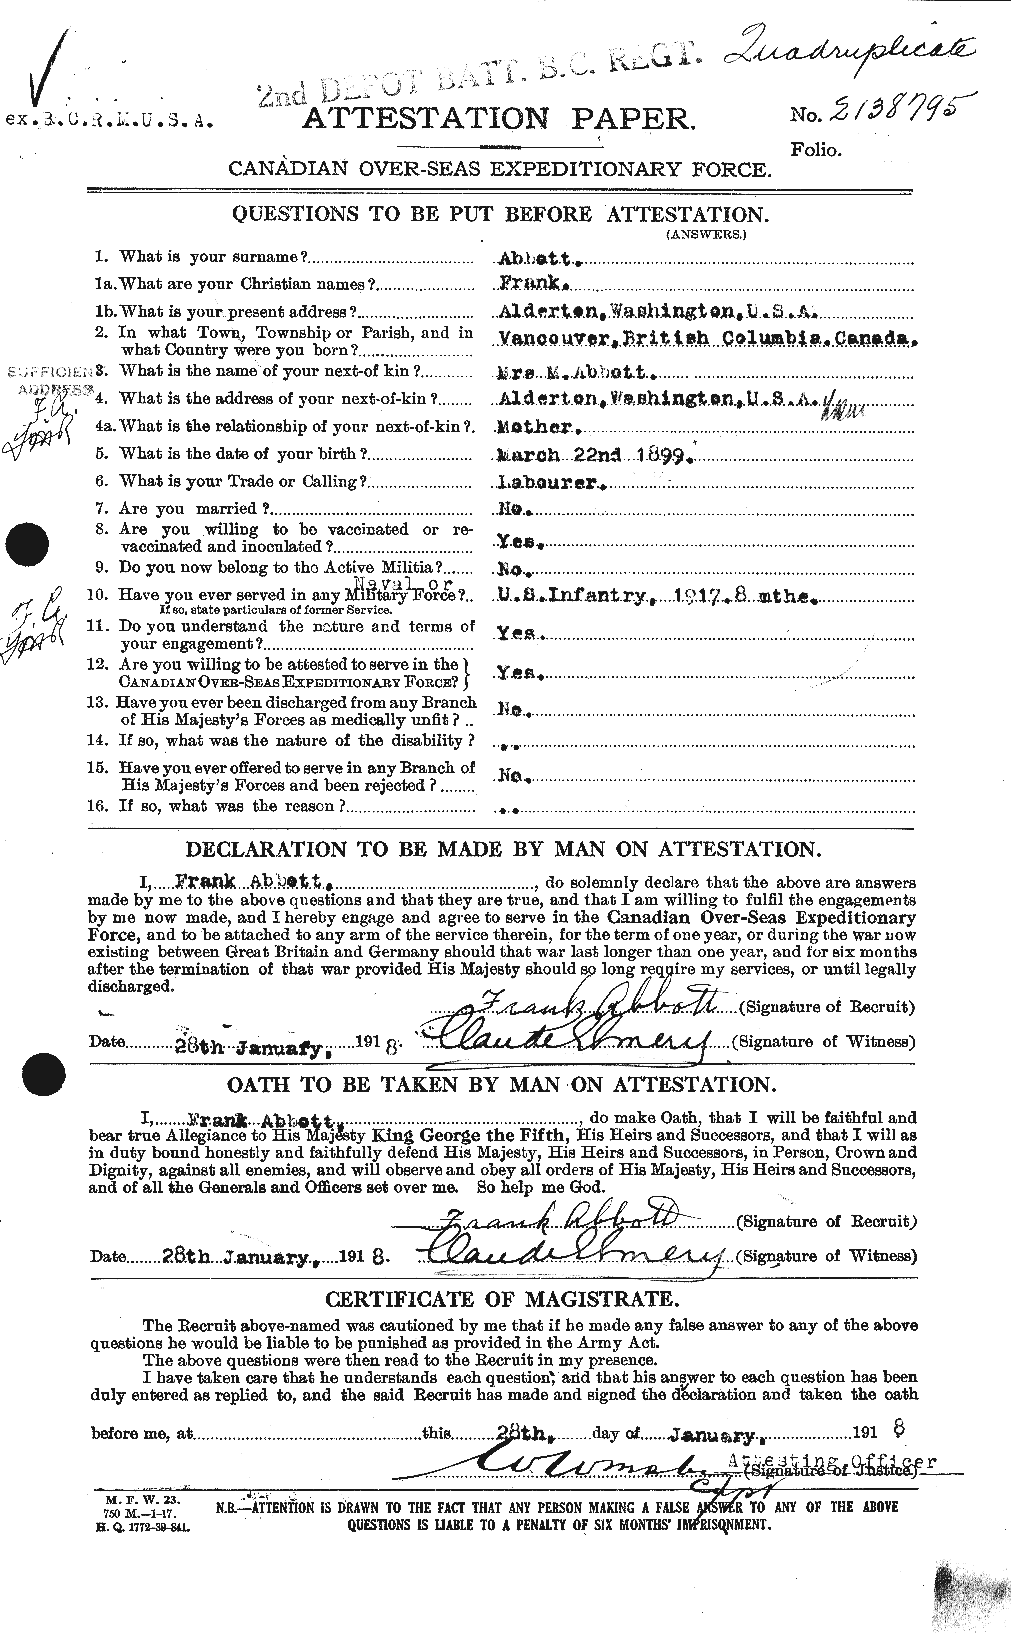 Personnel Records of the First World War - CEF 200915a